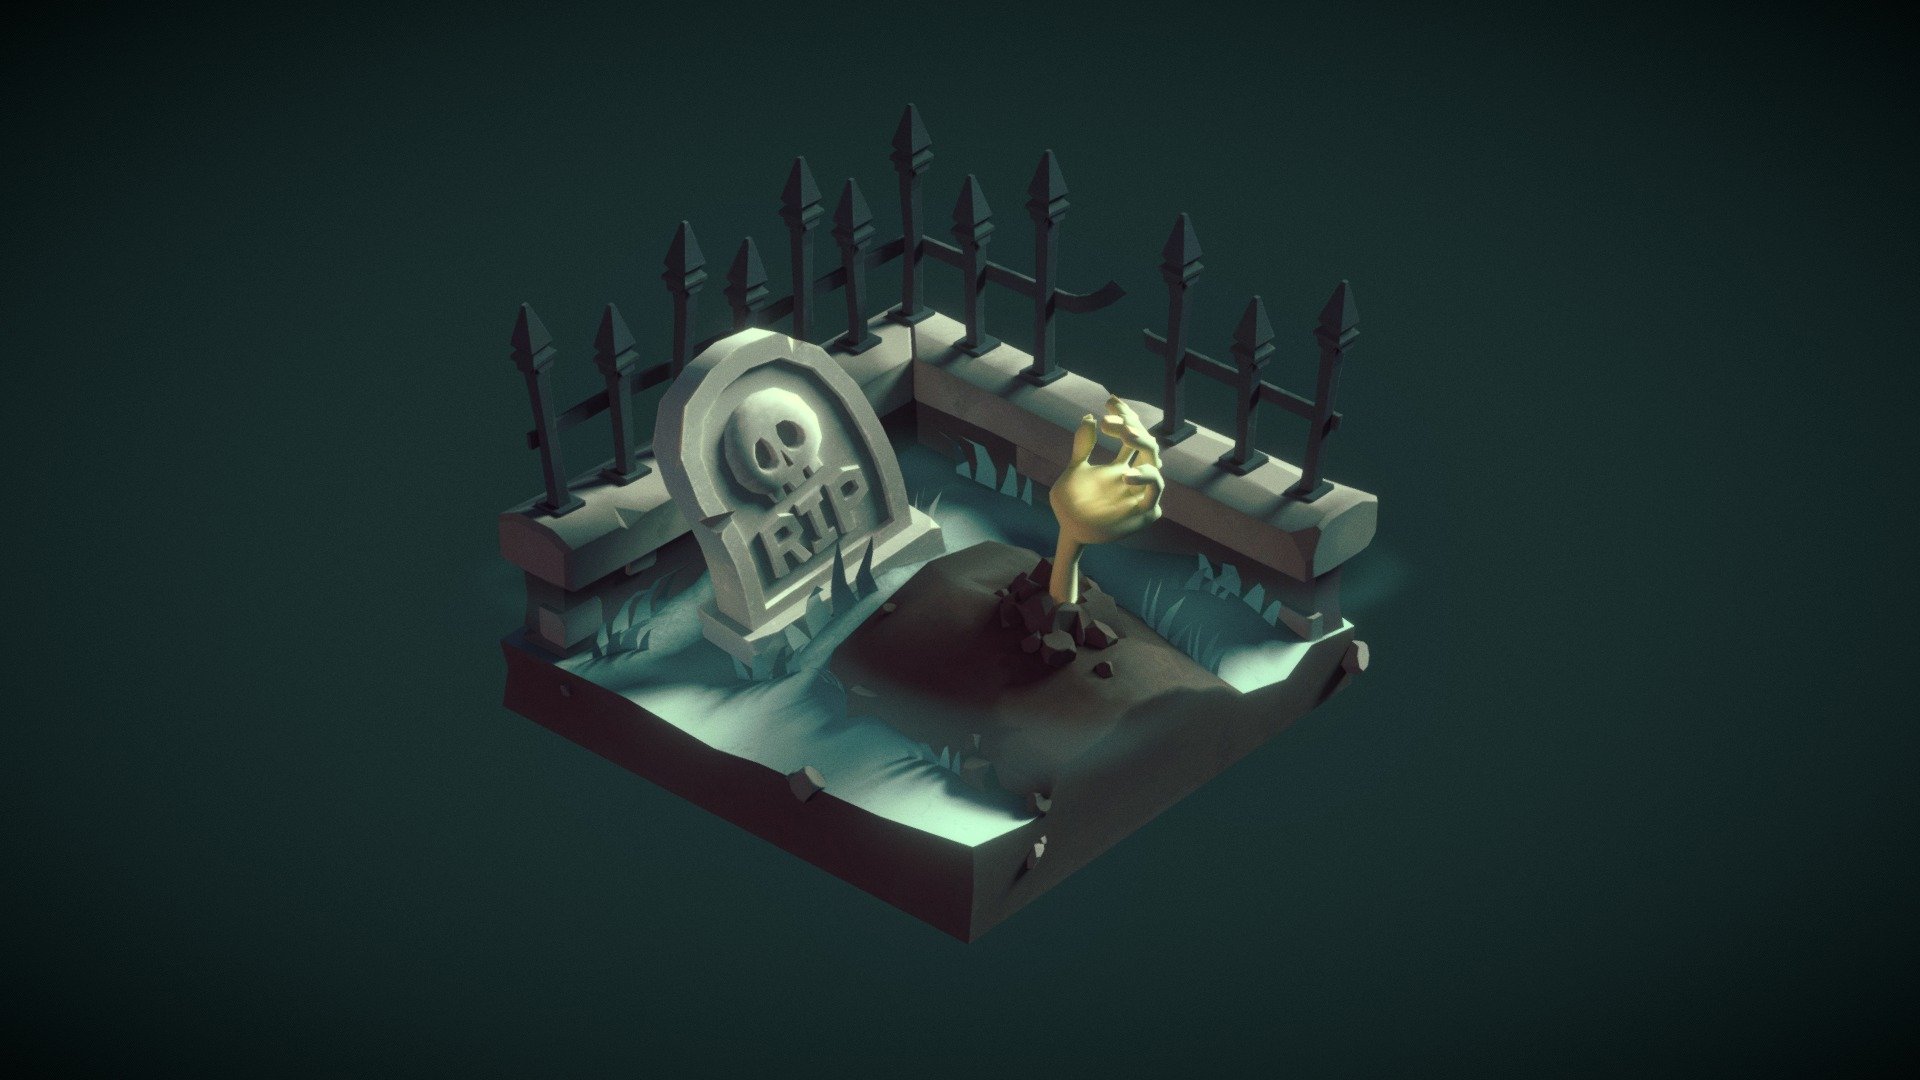 A small scene to get myself into the Halloween spirit. Modeled, lit and baked in Blender, texturing and post-processing in Photoshop 3d model